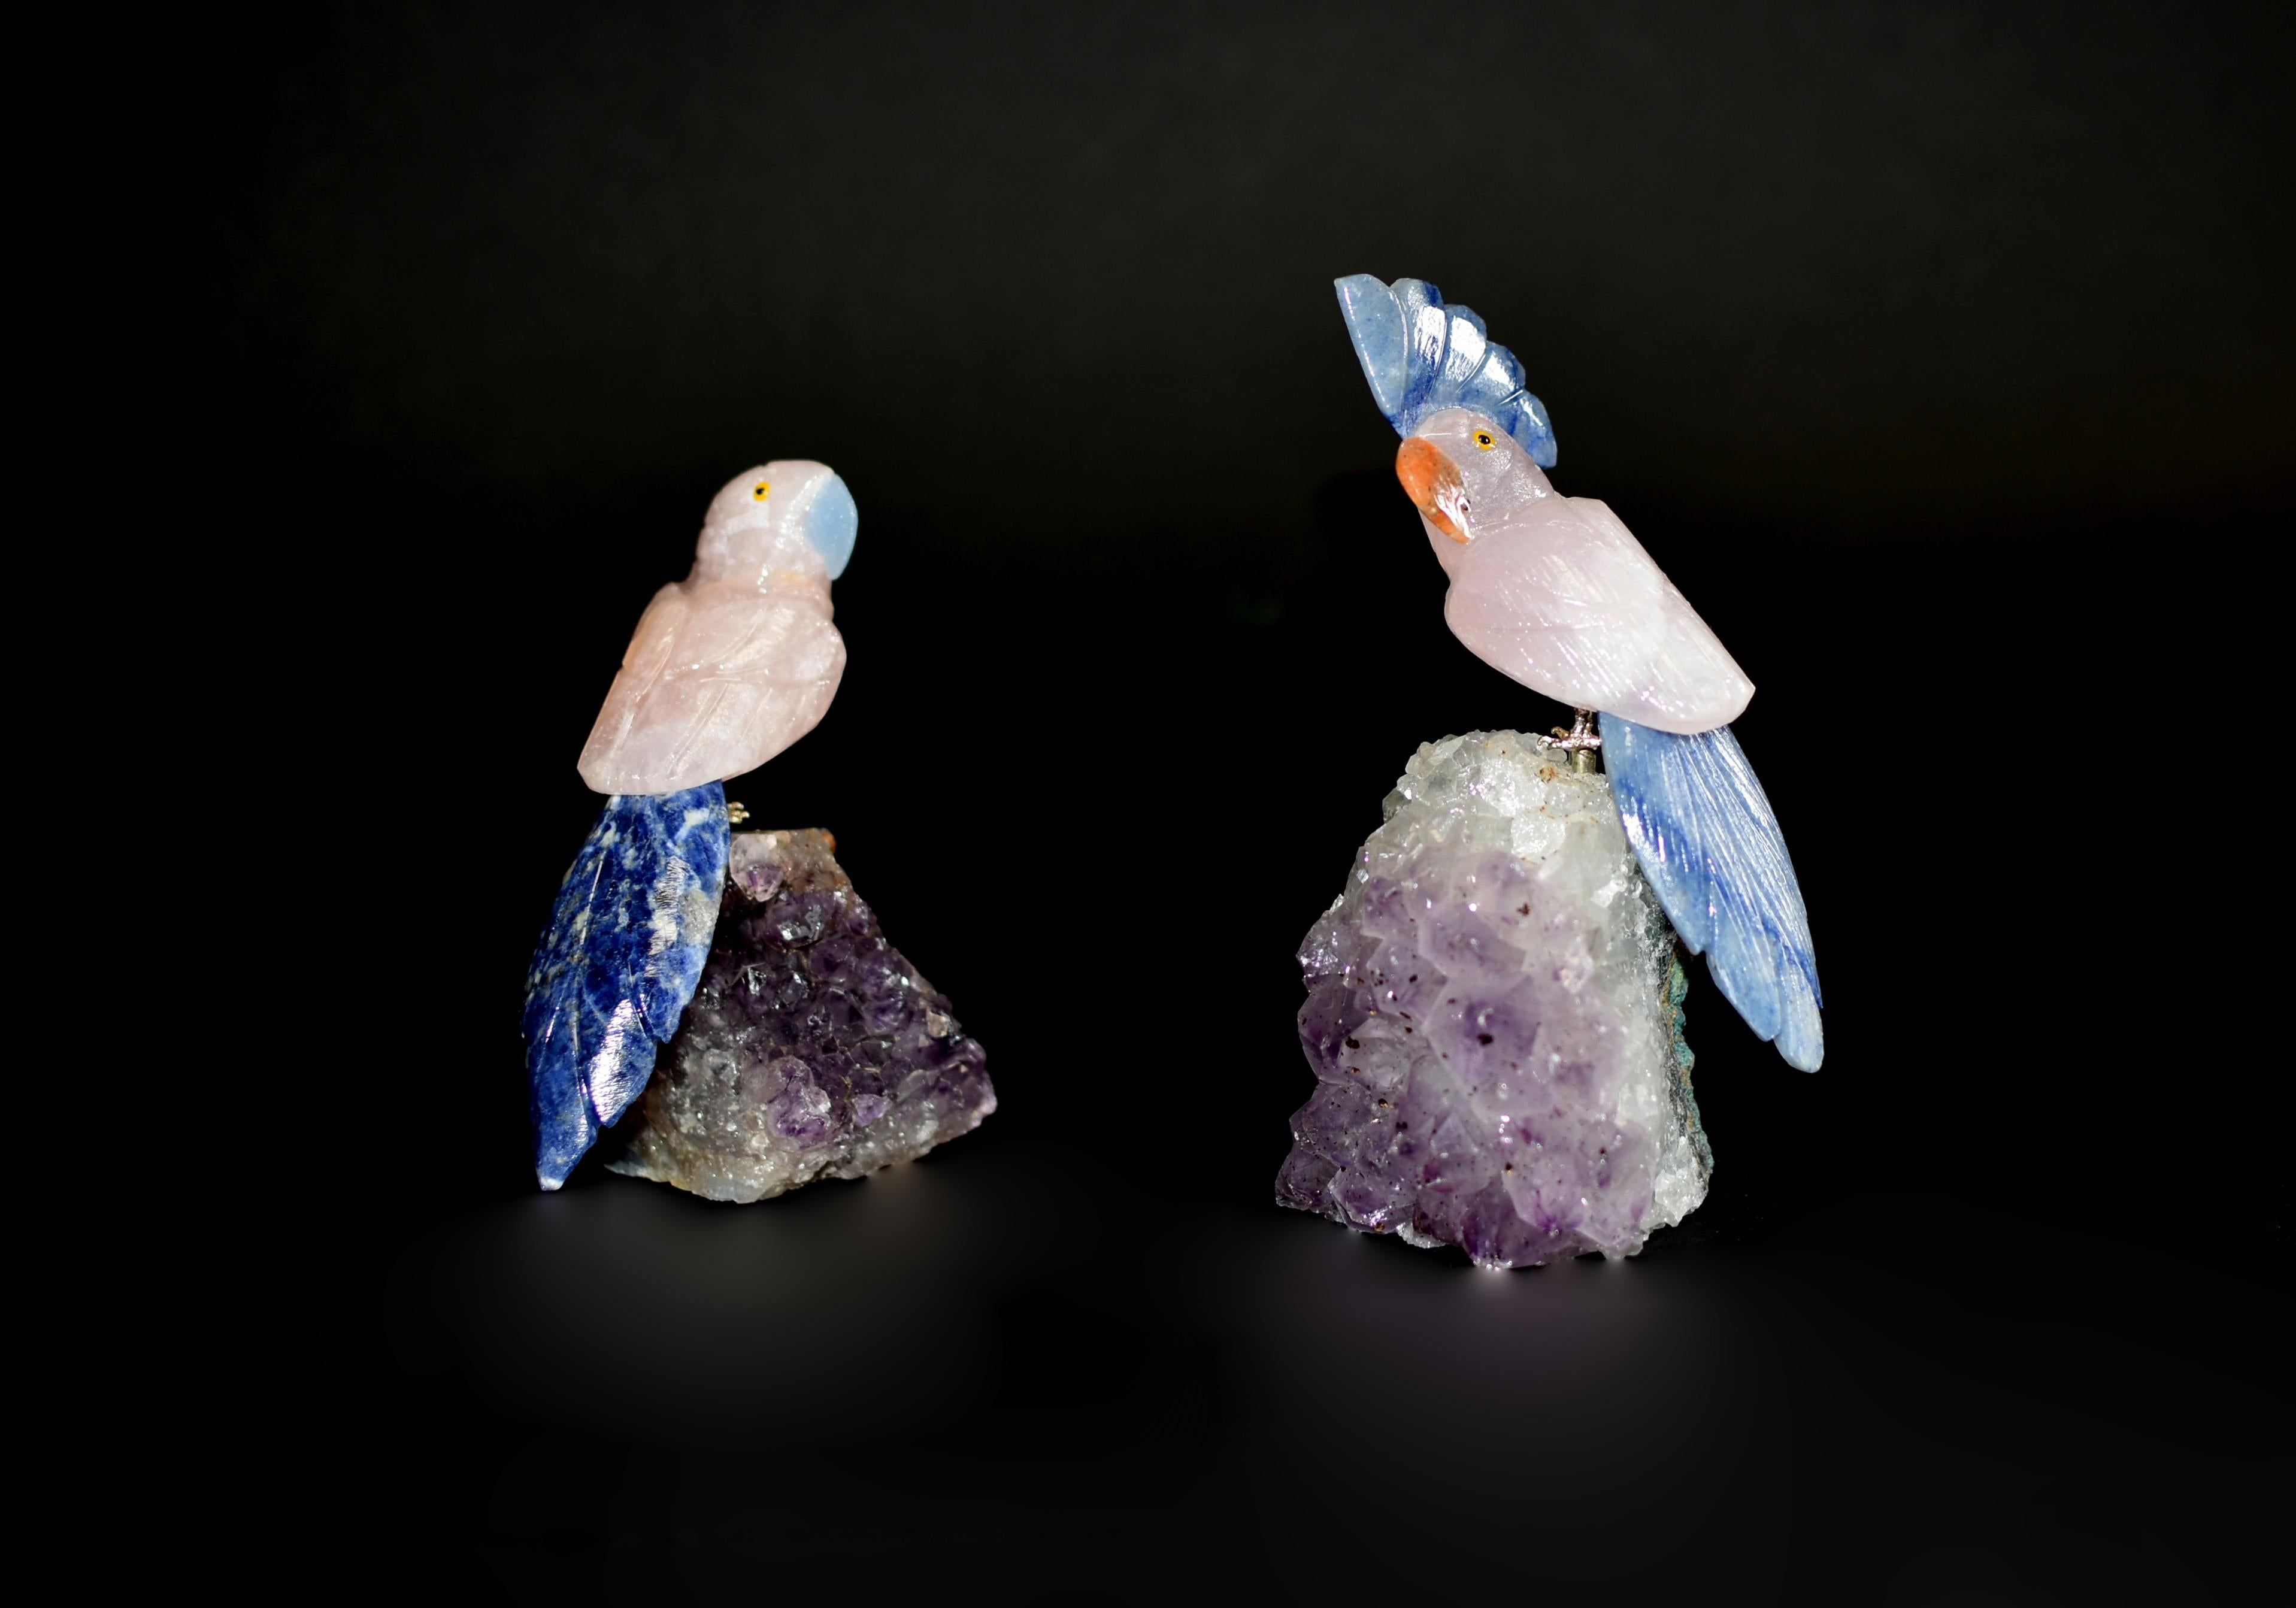 Two rose quartz parrots perched on amethyst clusters. Realistically modelled with curious and amusing expression, with natural rose quartz plumage and blue sodalite tails. Beaks in blue and orange calcite. The claws in brass, mounting on clusters of